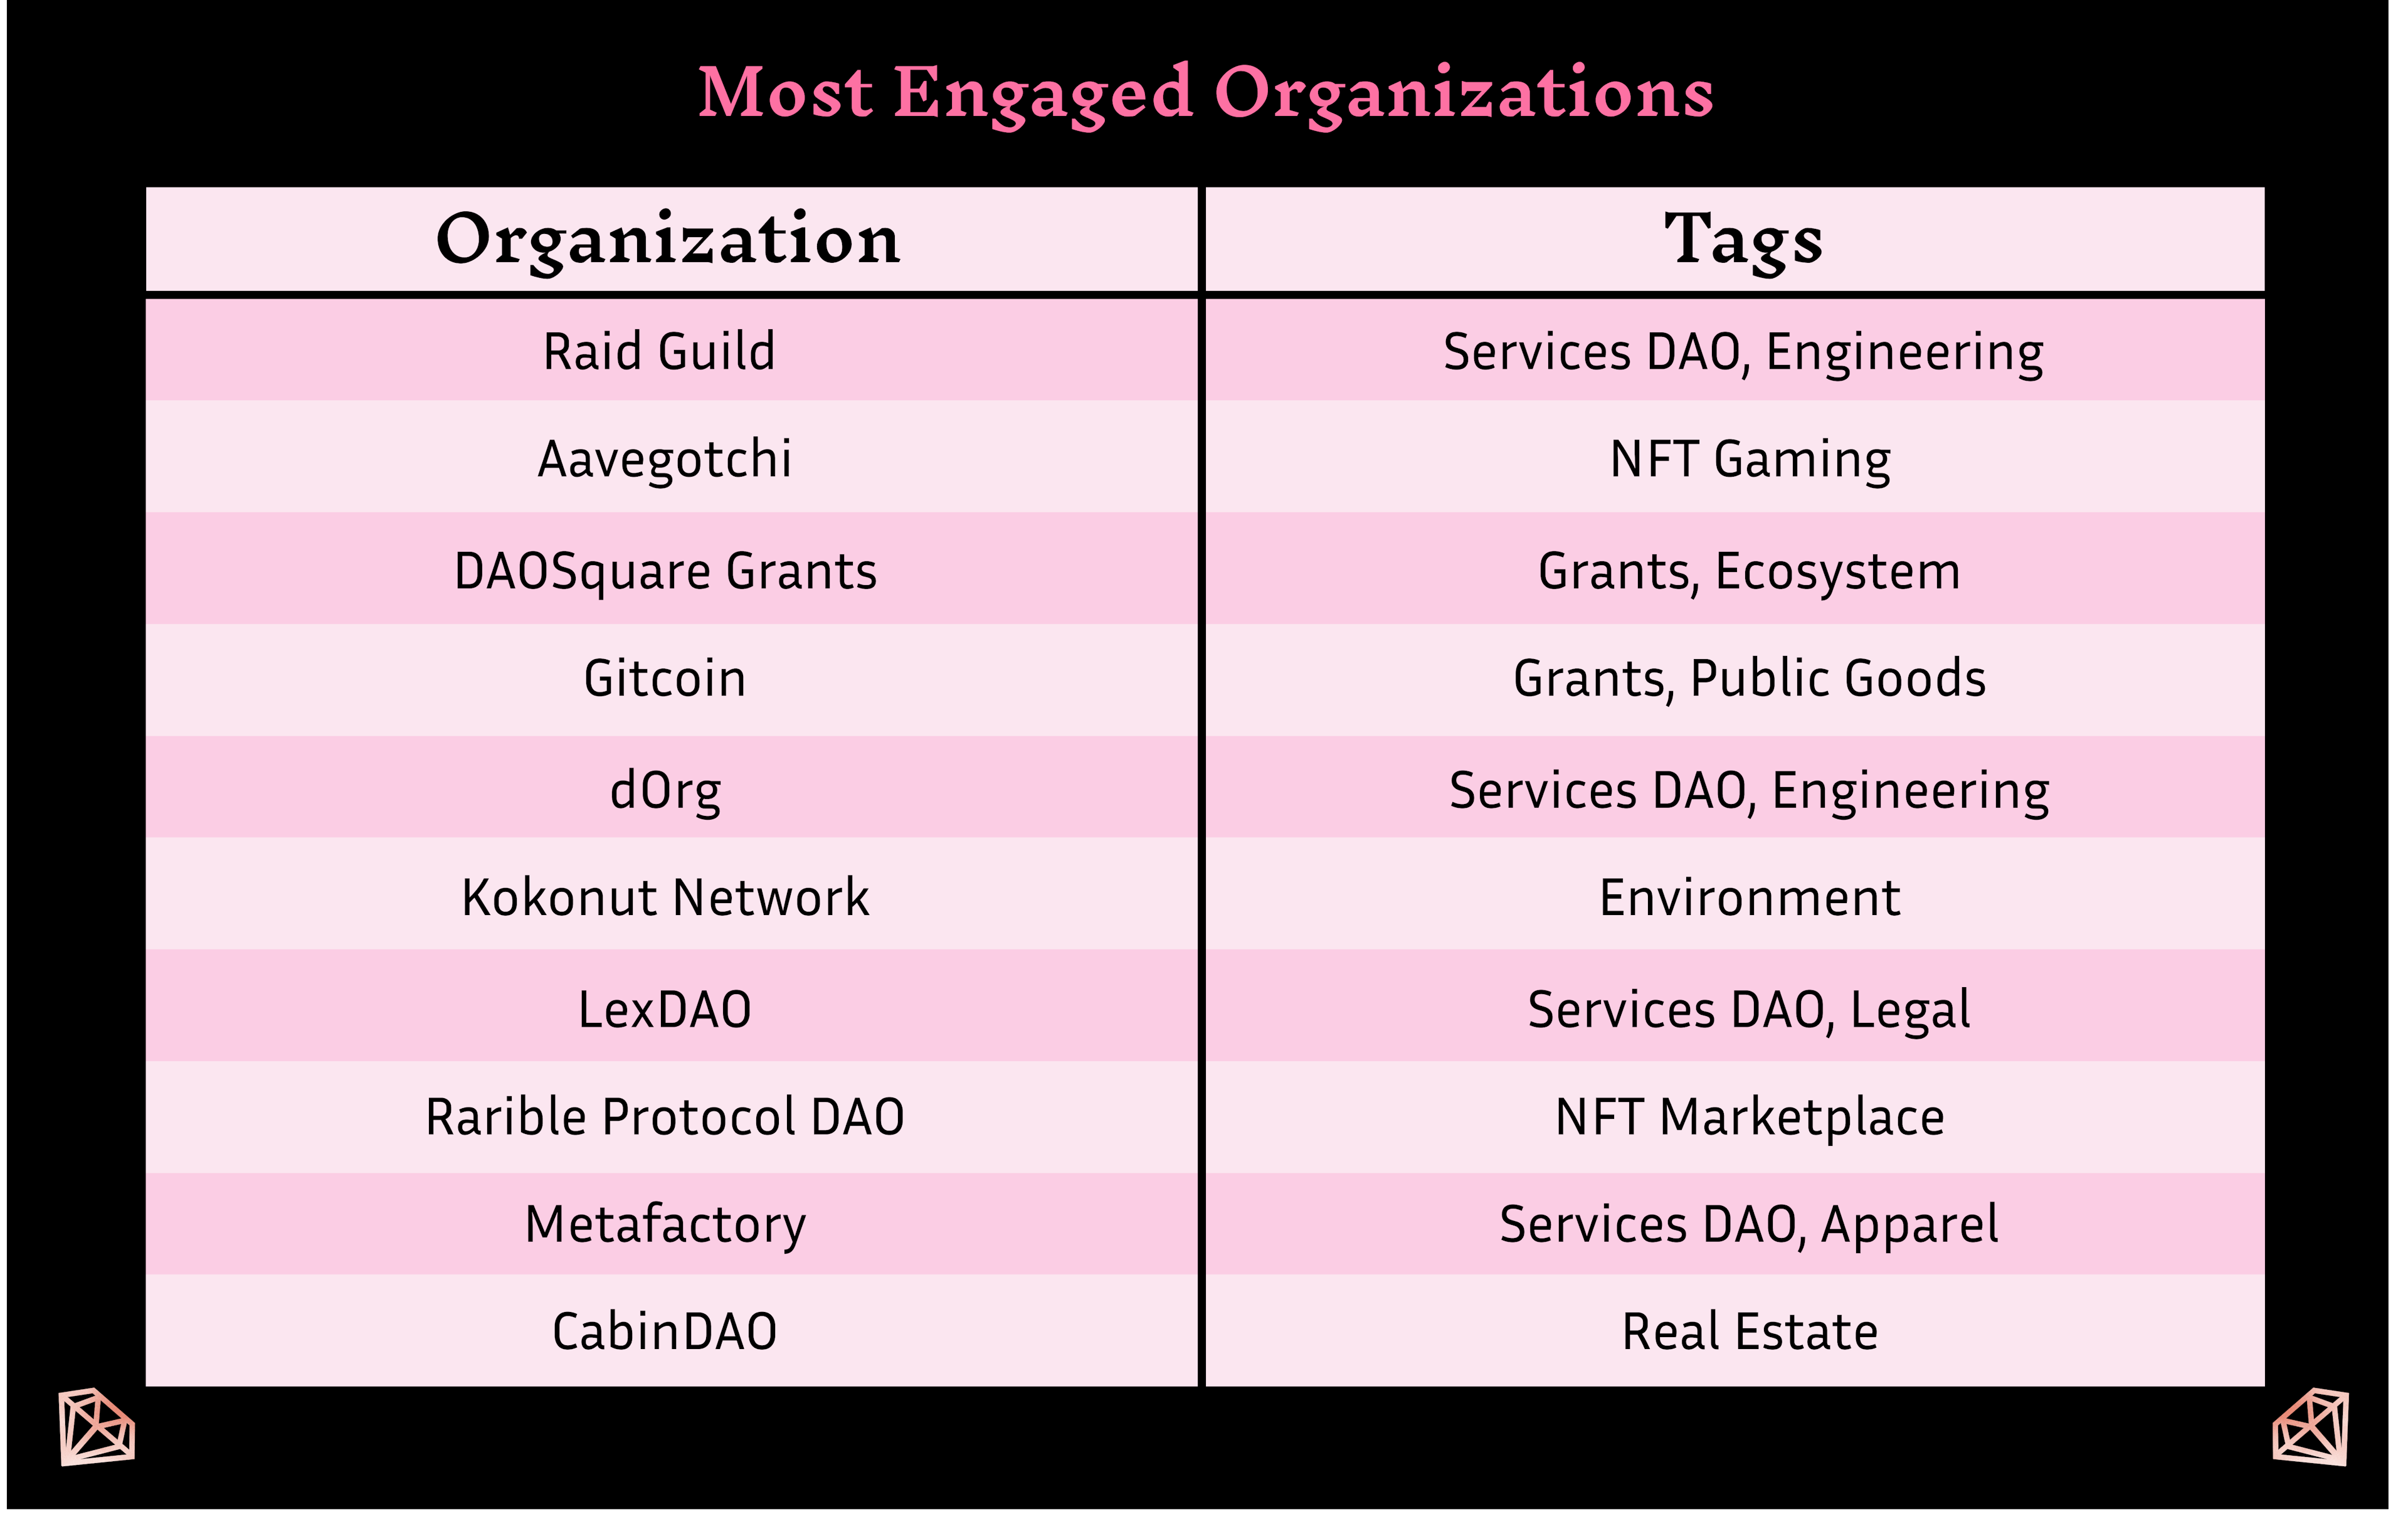 Graph of organizations with the highest engagement among MetaCartel members, according to Chainverse data.